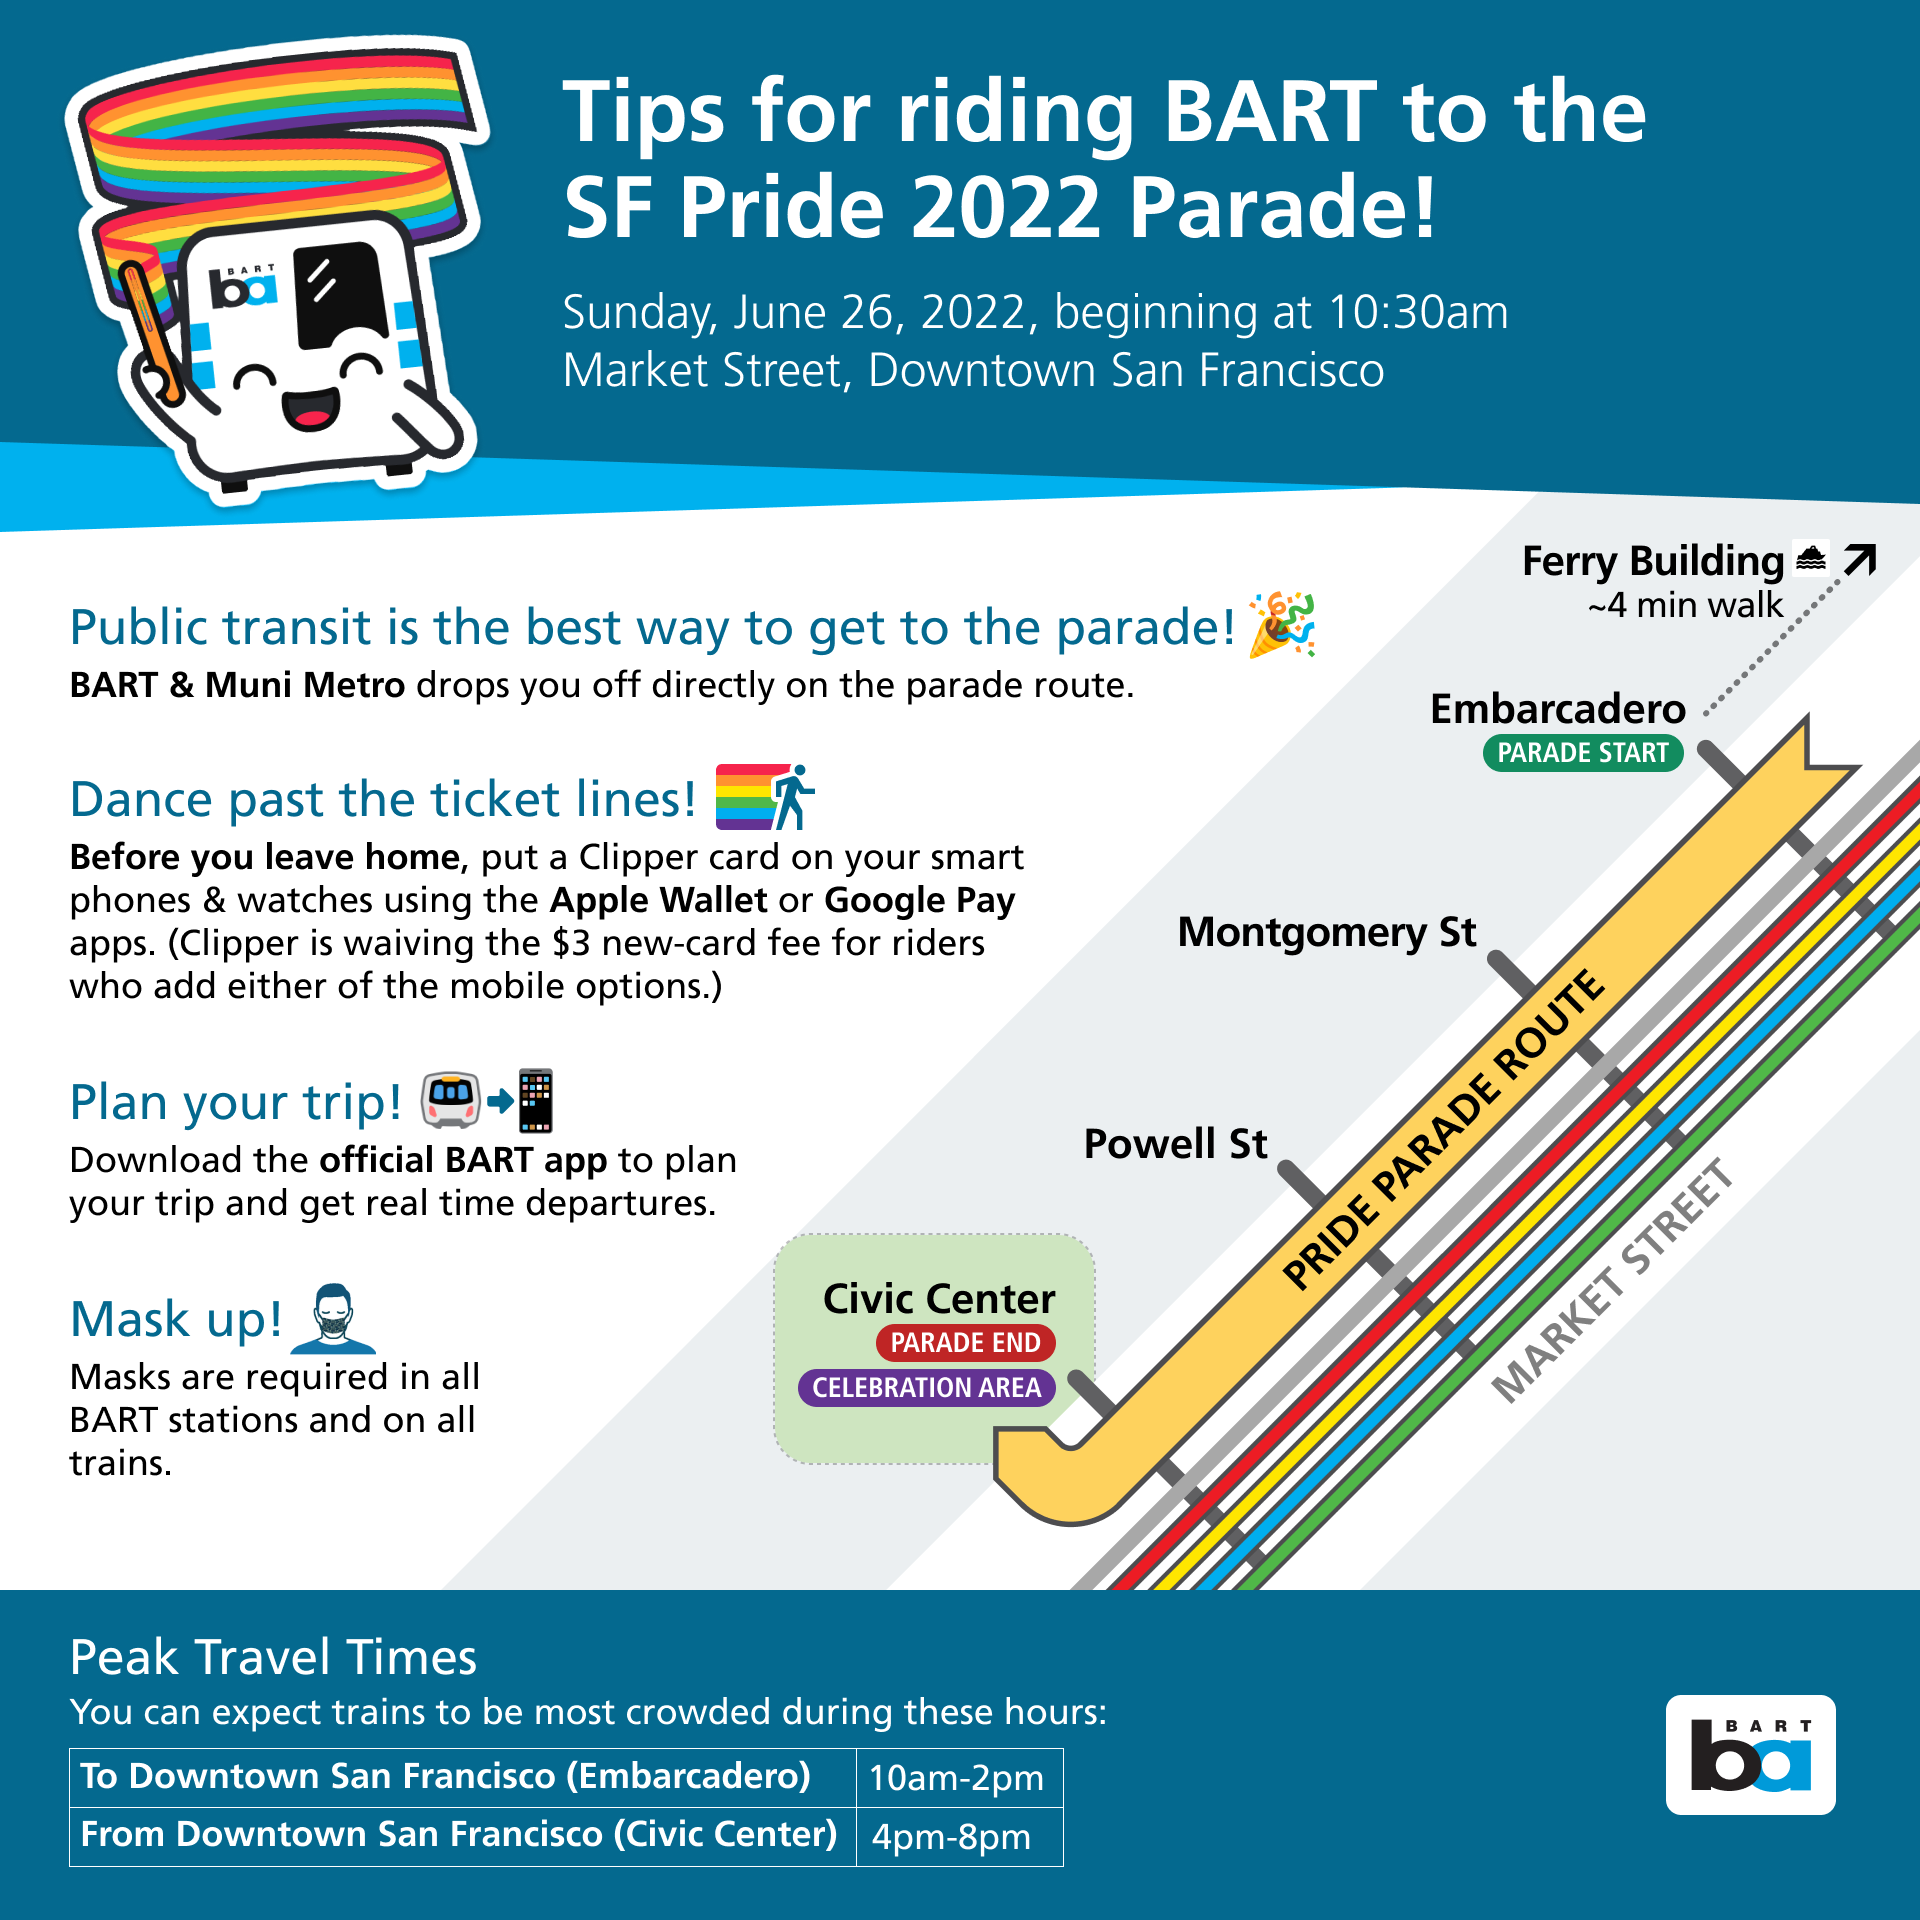 Celebrate SF Pride 2022 and take BART to the Parade Bay Area Rapid